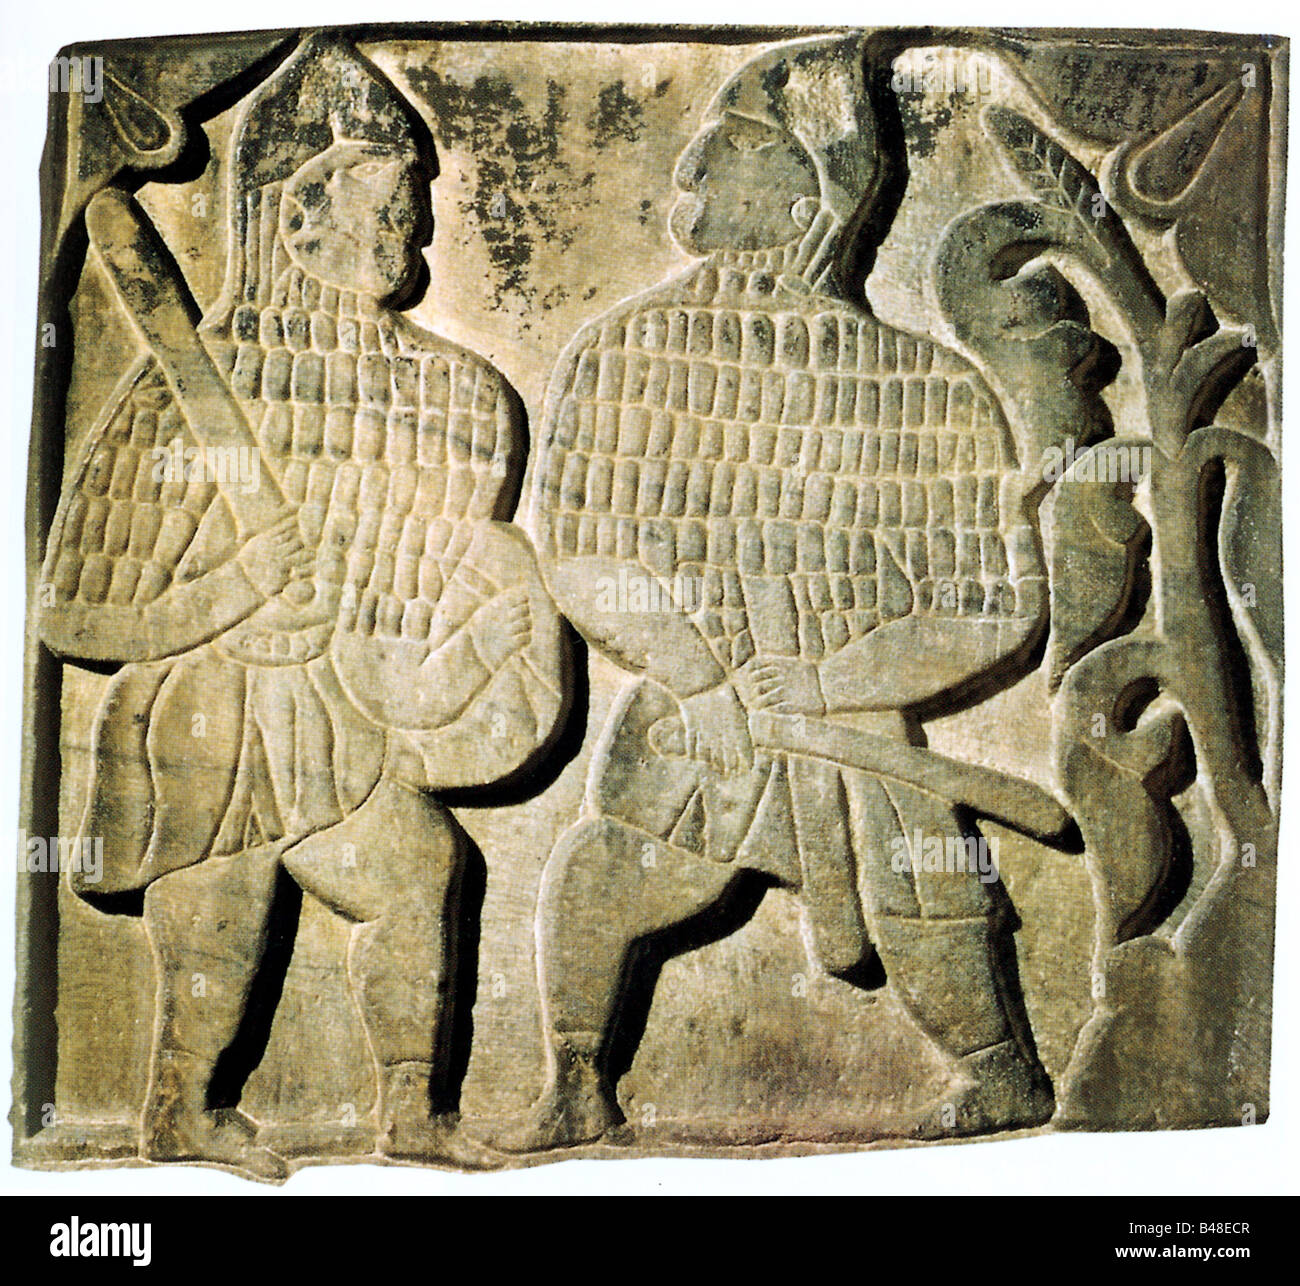 military, Turks, Seljuk warriors, relief, 13th century, Museum for Turkish and Islamic Art, Istanbul, Turkey, Seljuq, soldiers, arms, moslems, middle ages, historic, historical, medieval, people, Stock Photo